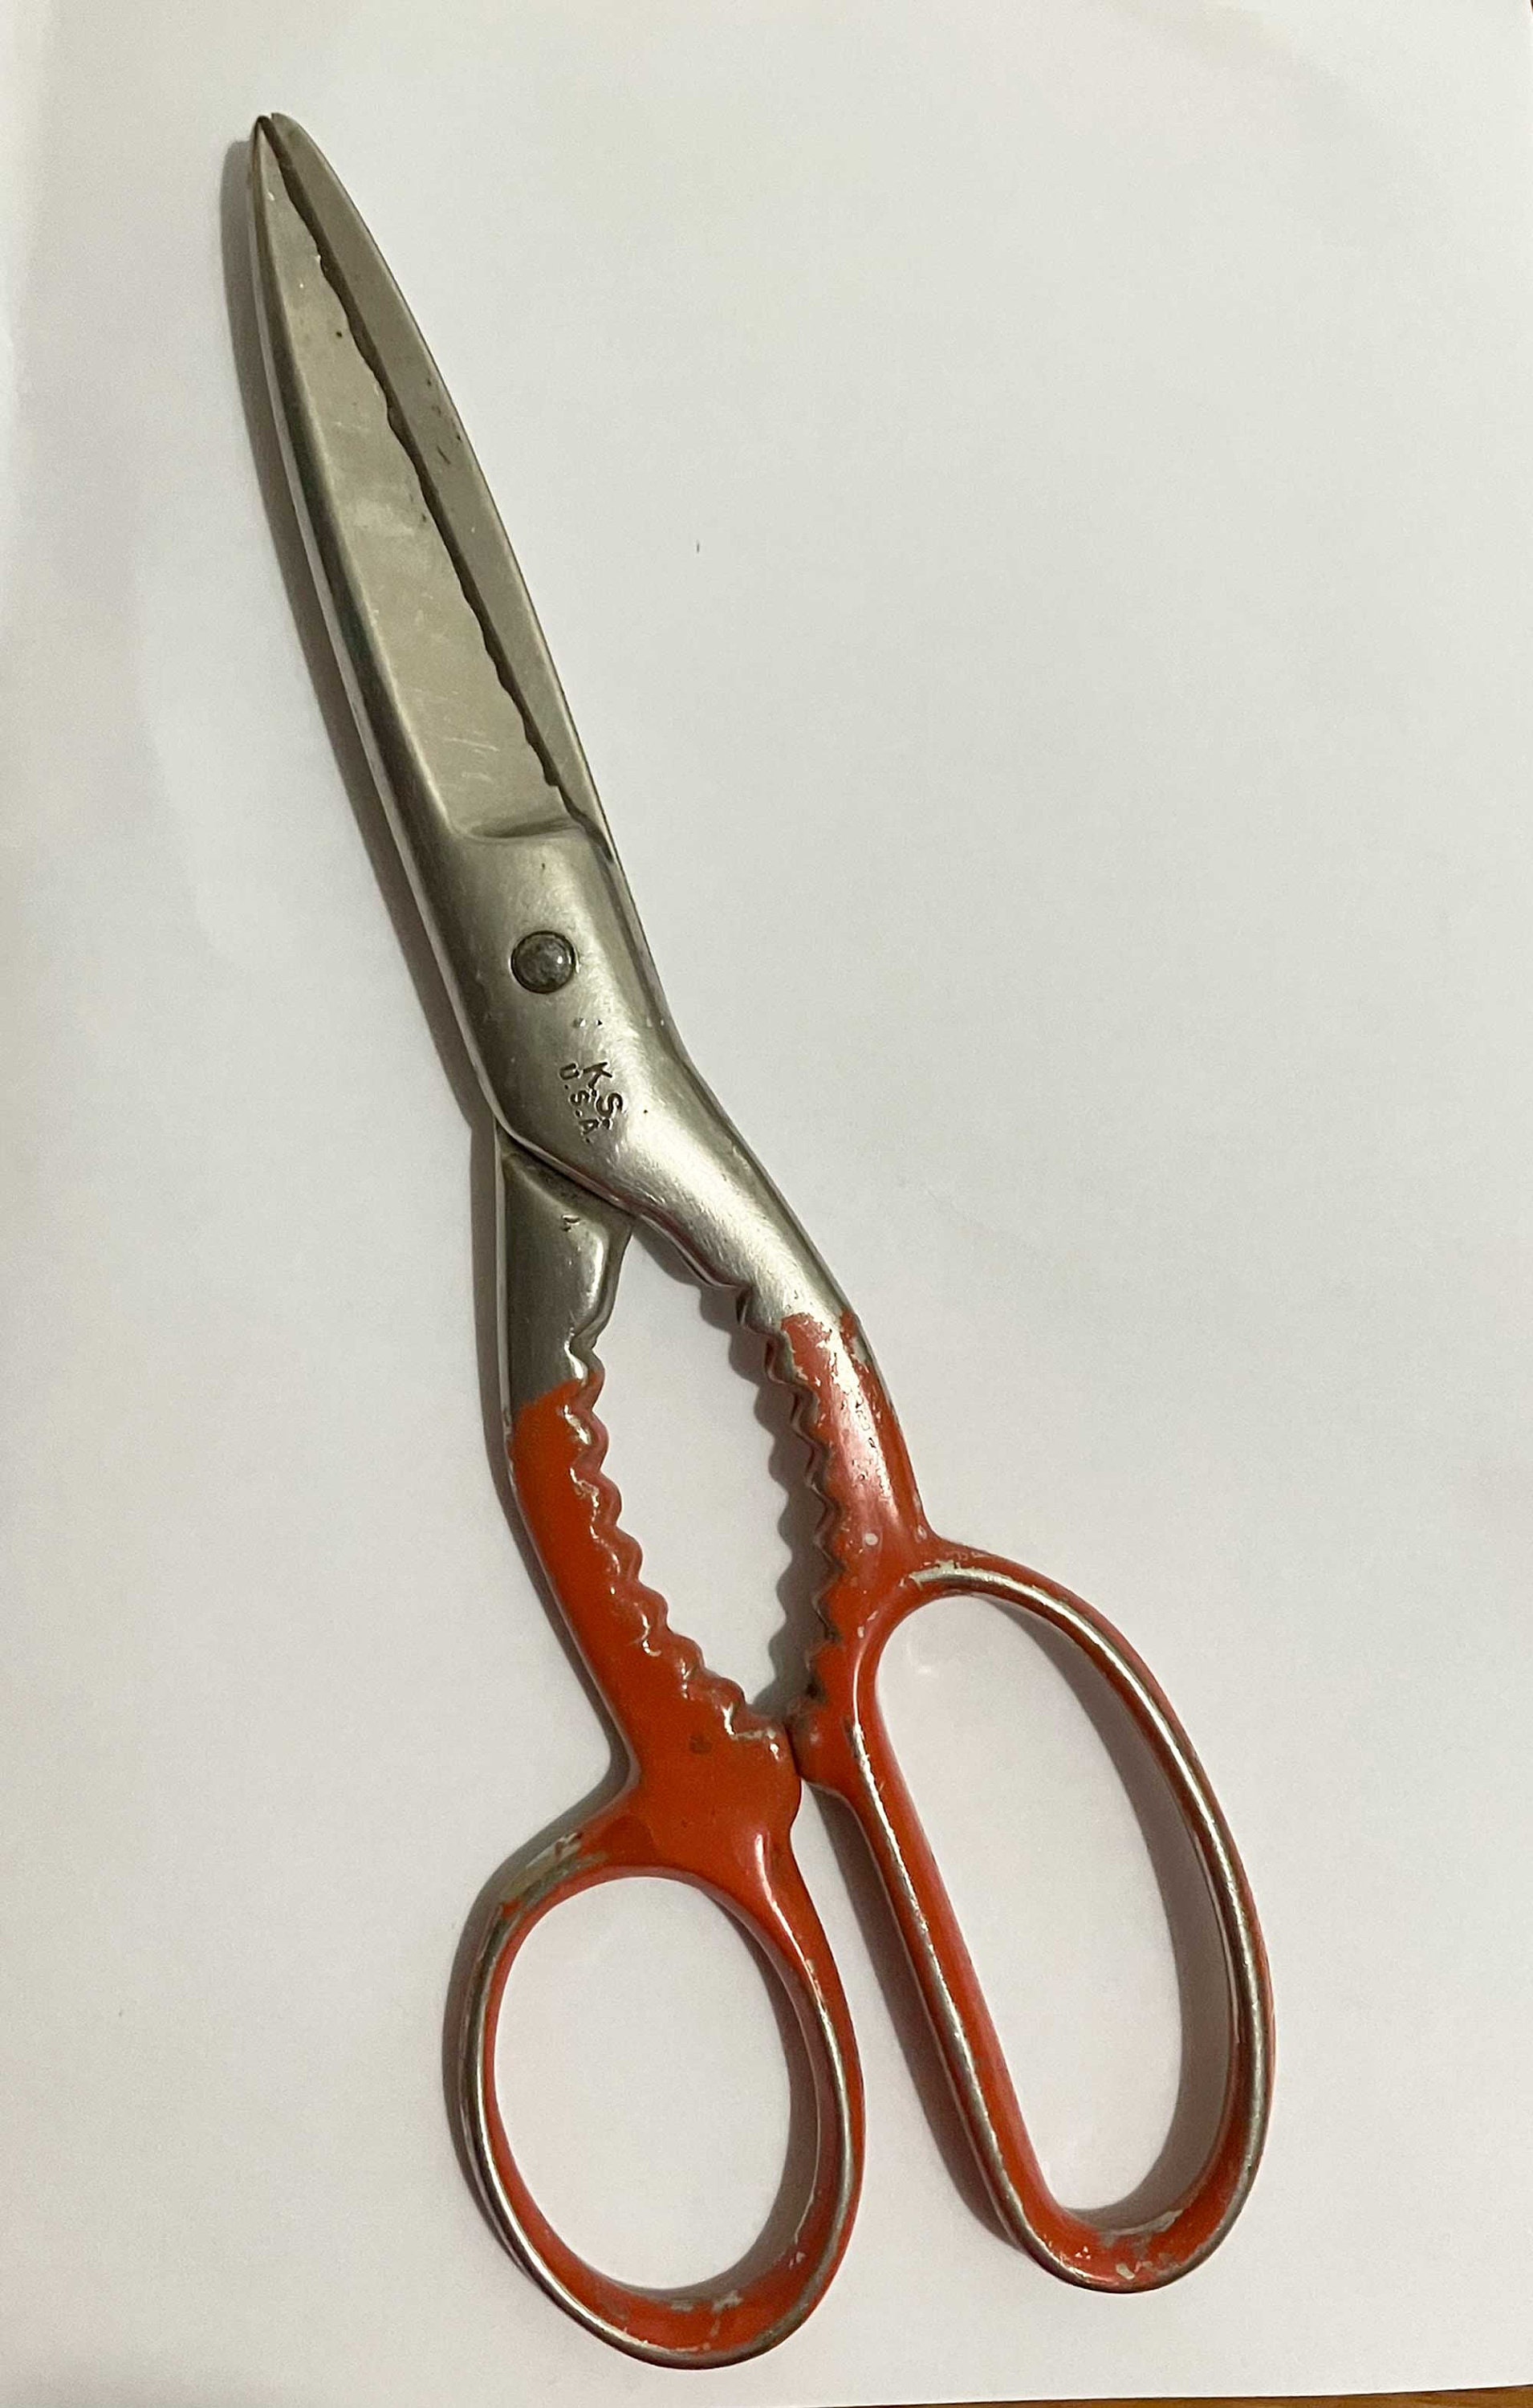 WISS USA 4 PROFESSIONALLY SHARPENED NEEDLEPOINT EMBROIDERY SEWING SCISSORS  #764